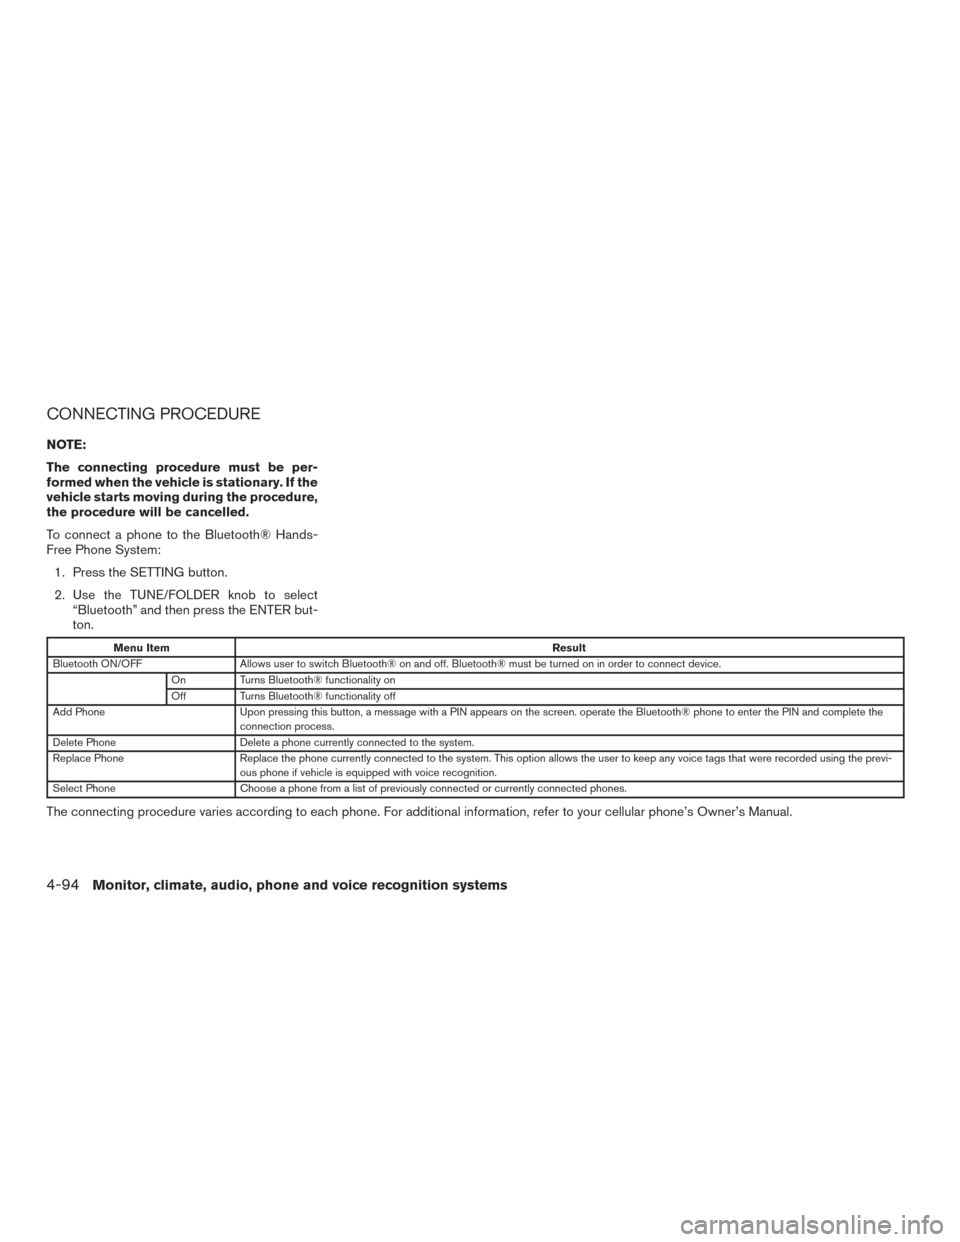 NISSAN FRONTIER 2016 D23 / 3.G Owners Manual CONNECTING PROCEDURE
NOTE:
The connecting procedure must be per-
formed when the vehicle is stationary. If the
vehicle starts moving during the procedure,
the procedure will be cancelled.
To connect a